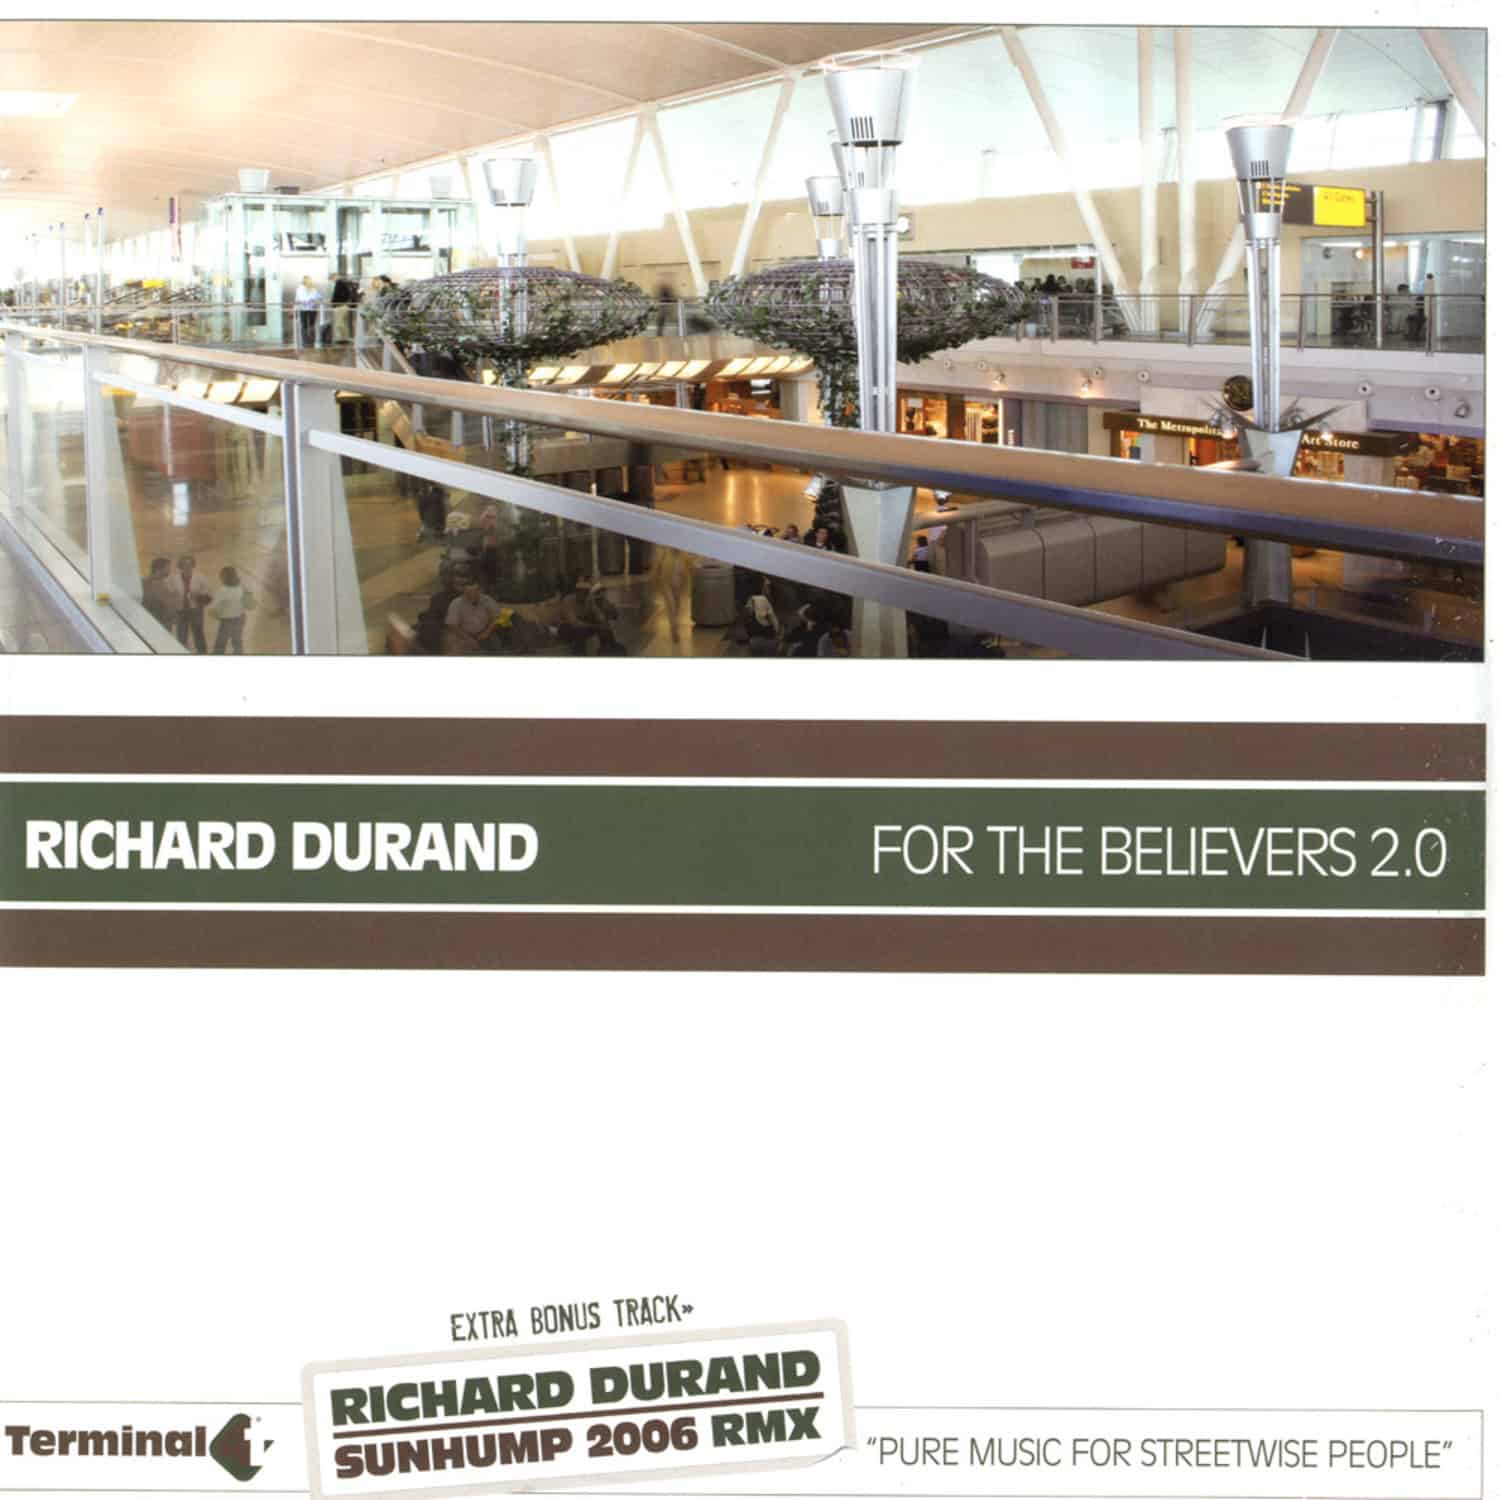 Richard Durand - FOR THE BELIEVERS 2.0